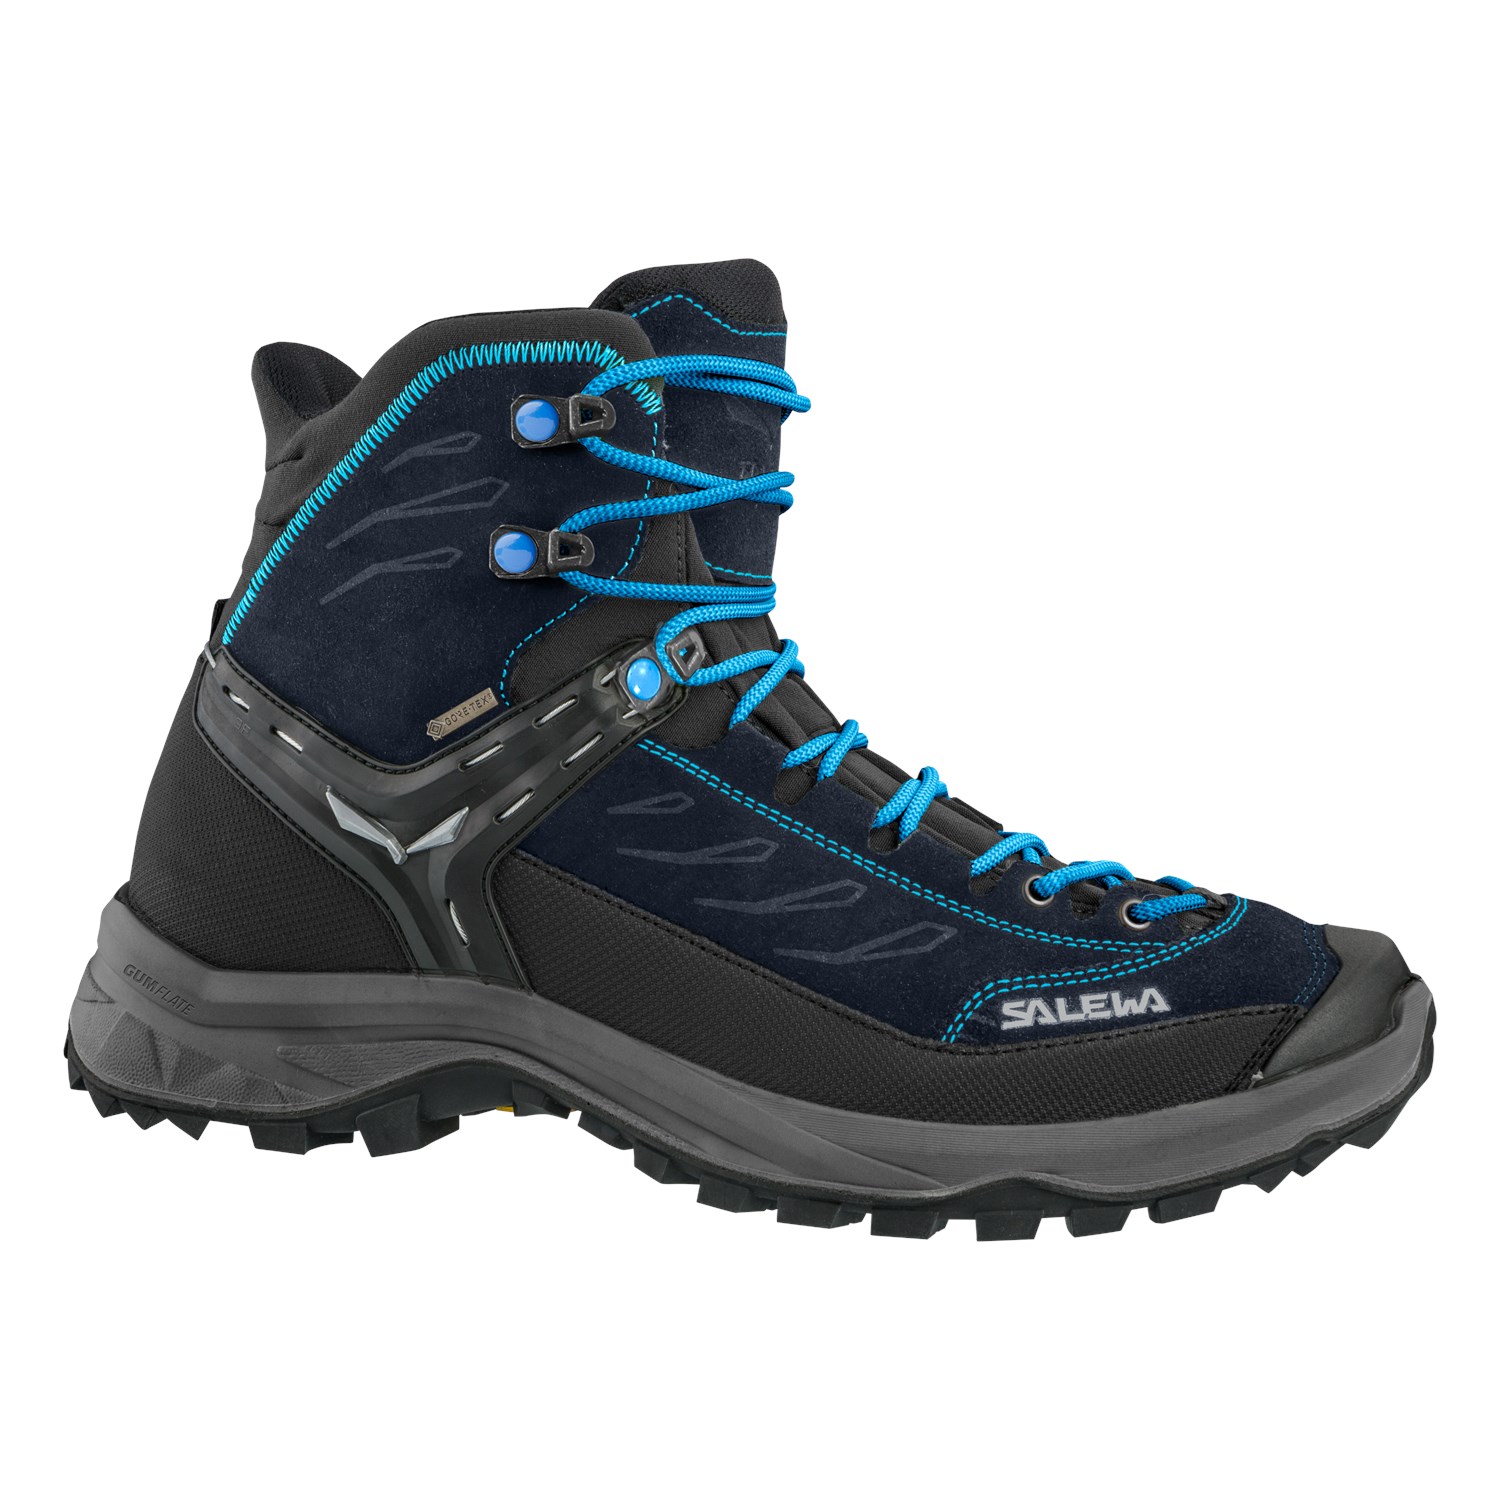 Outdoor Shoes -  salewa Hike Trainer Mid GORE-TEX